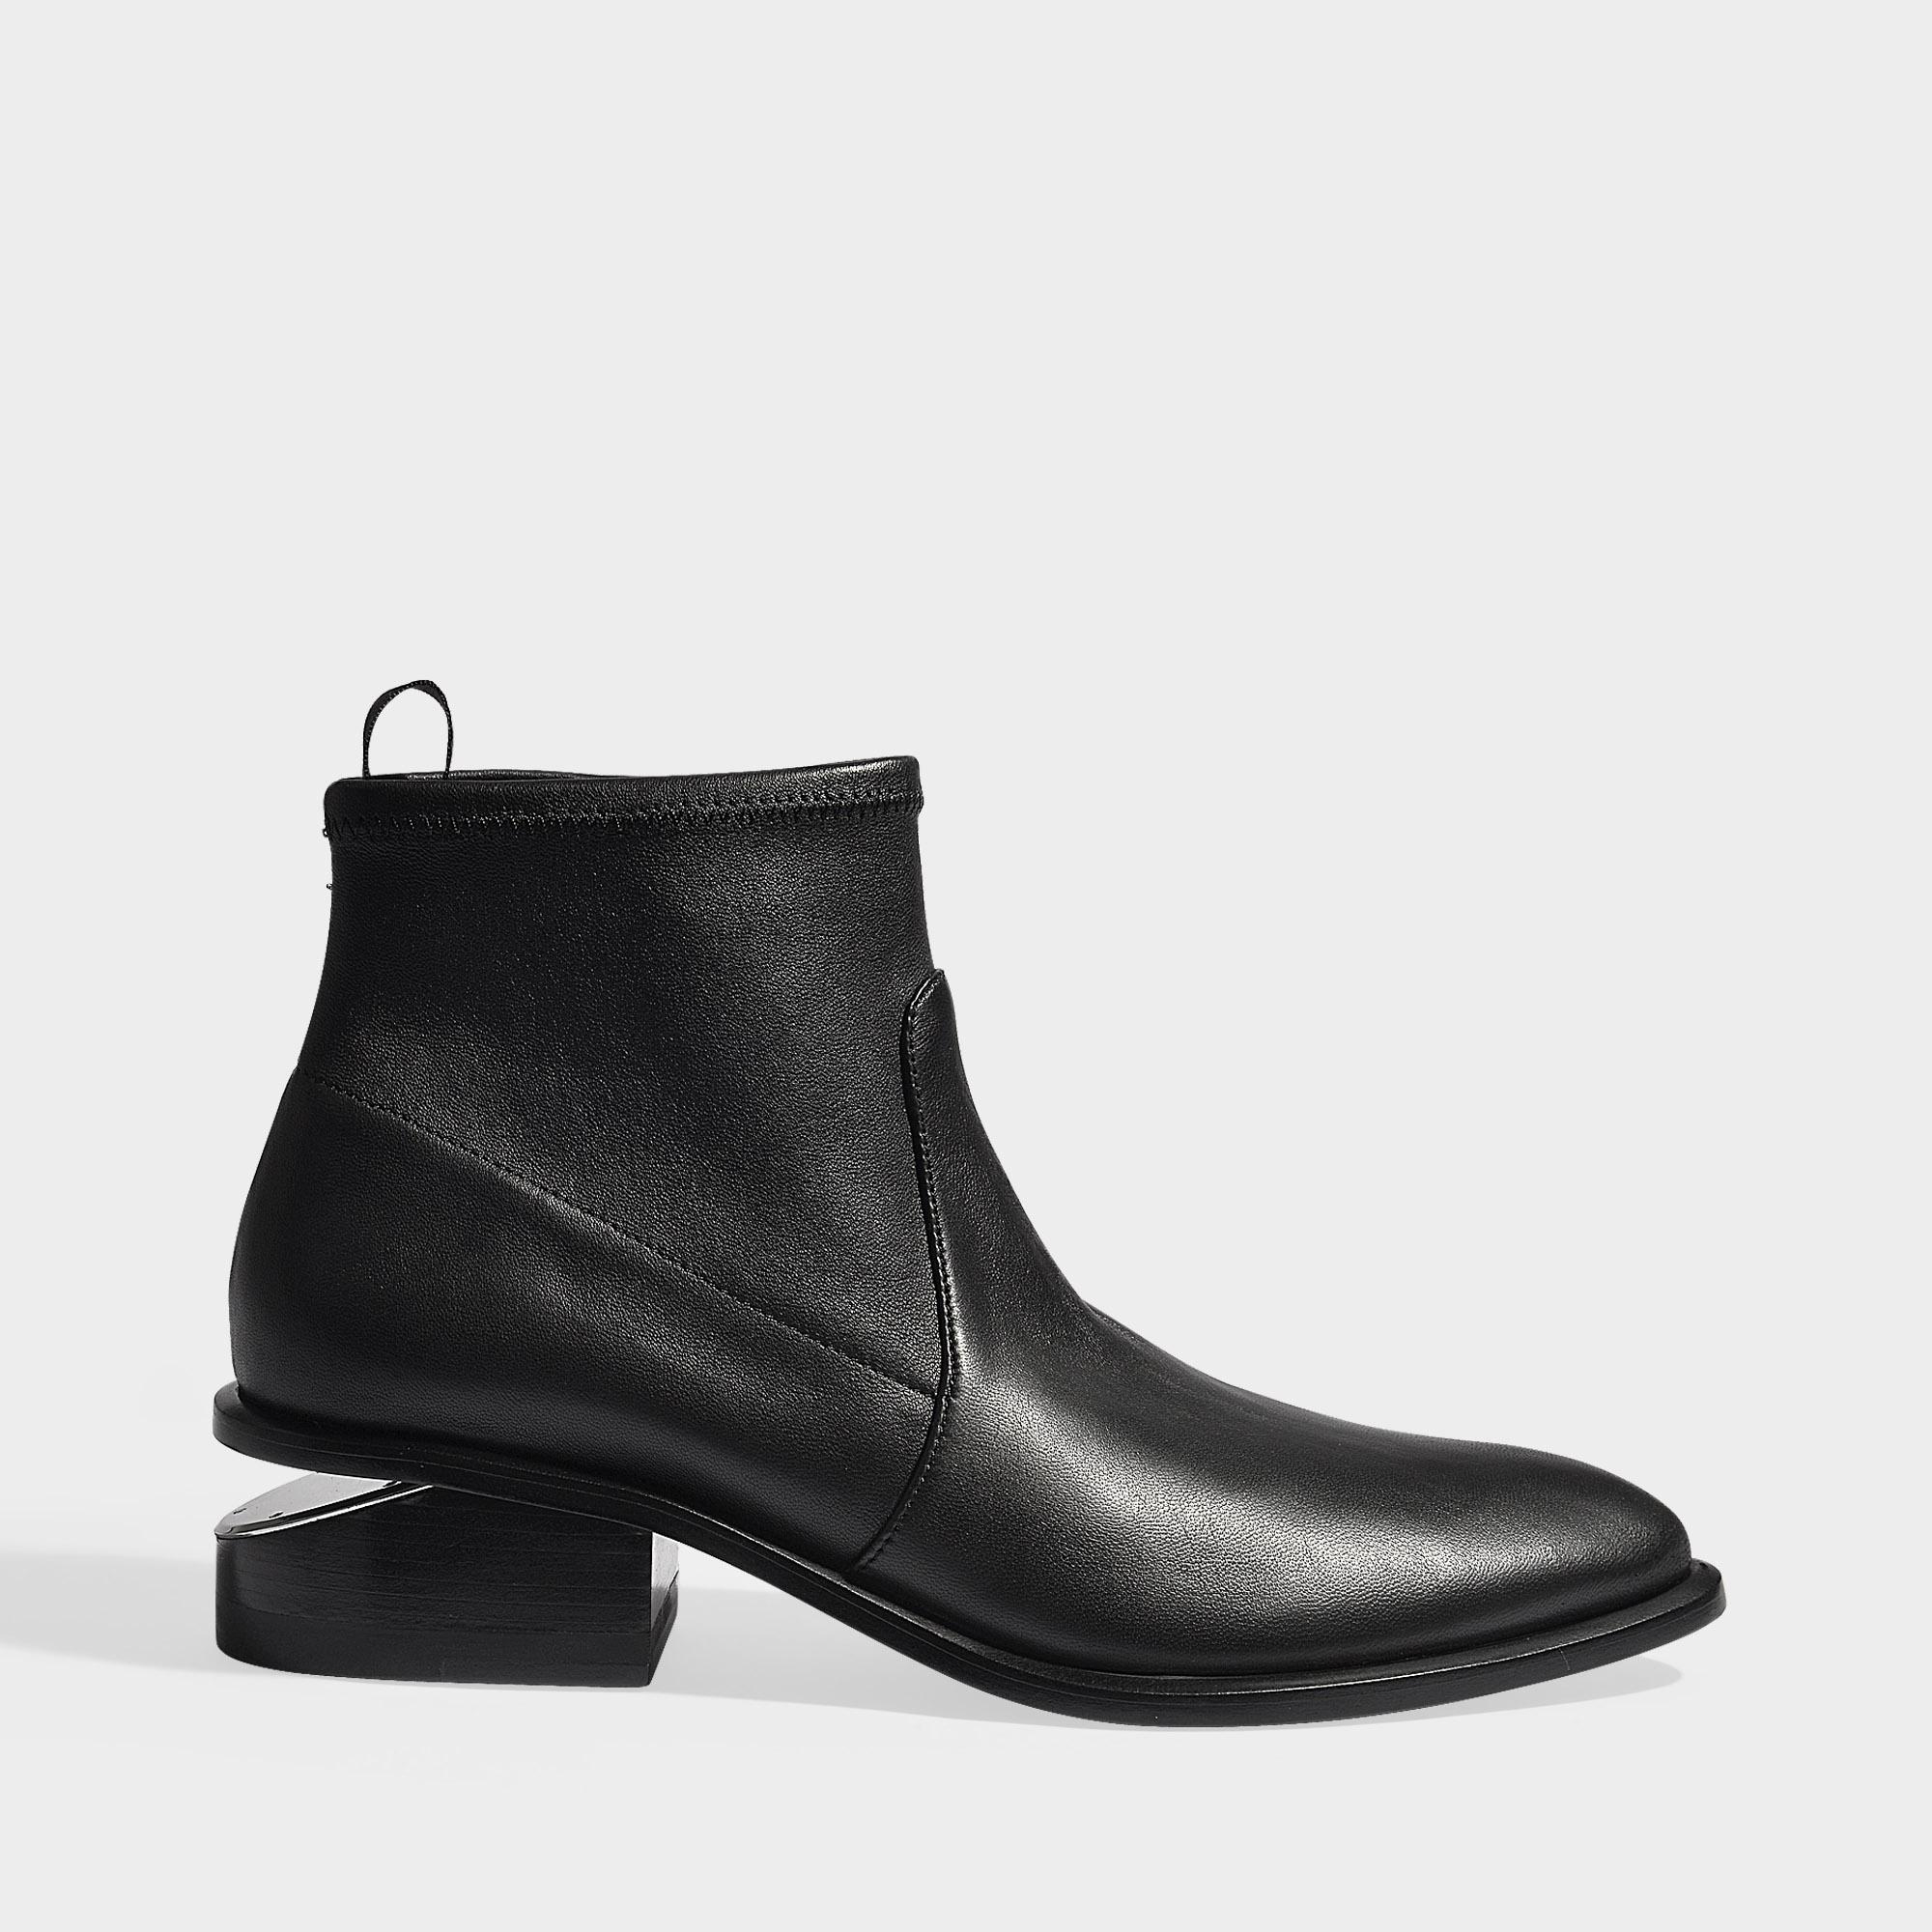 Lyst - Alexander Wang Kori Stretch Boots In Black Leather in Black